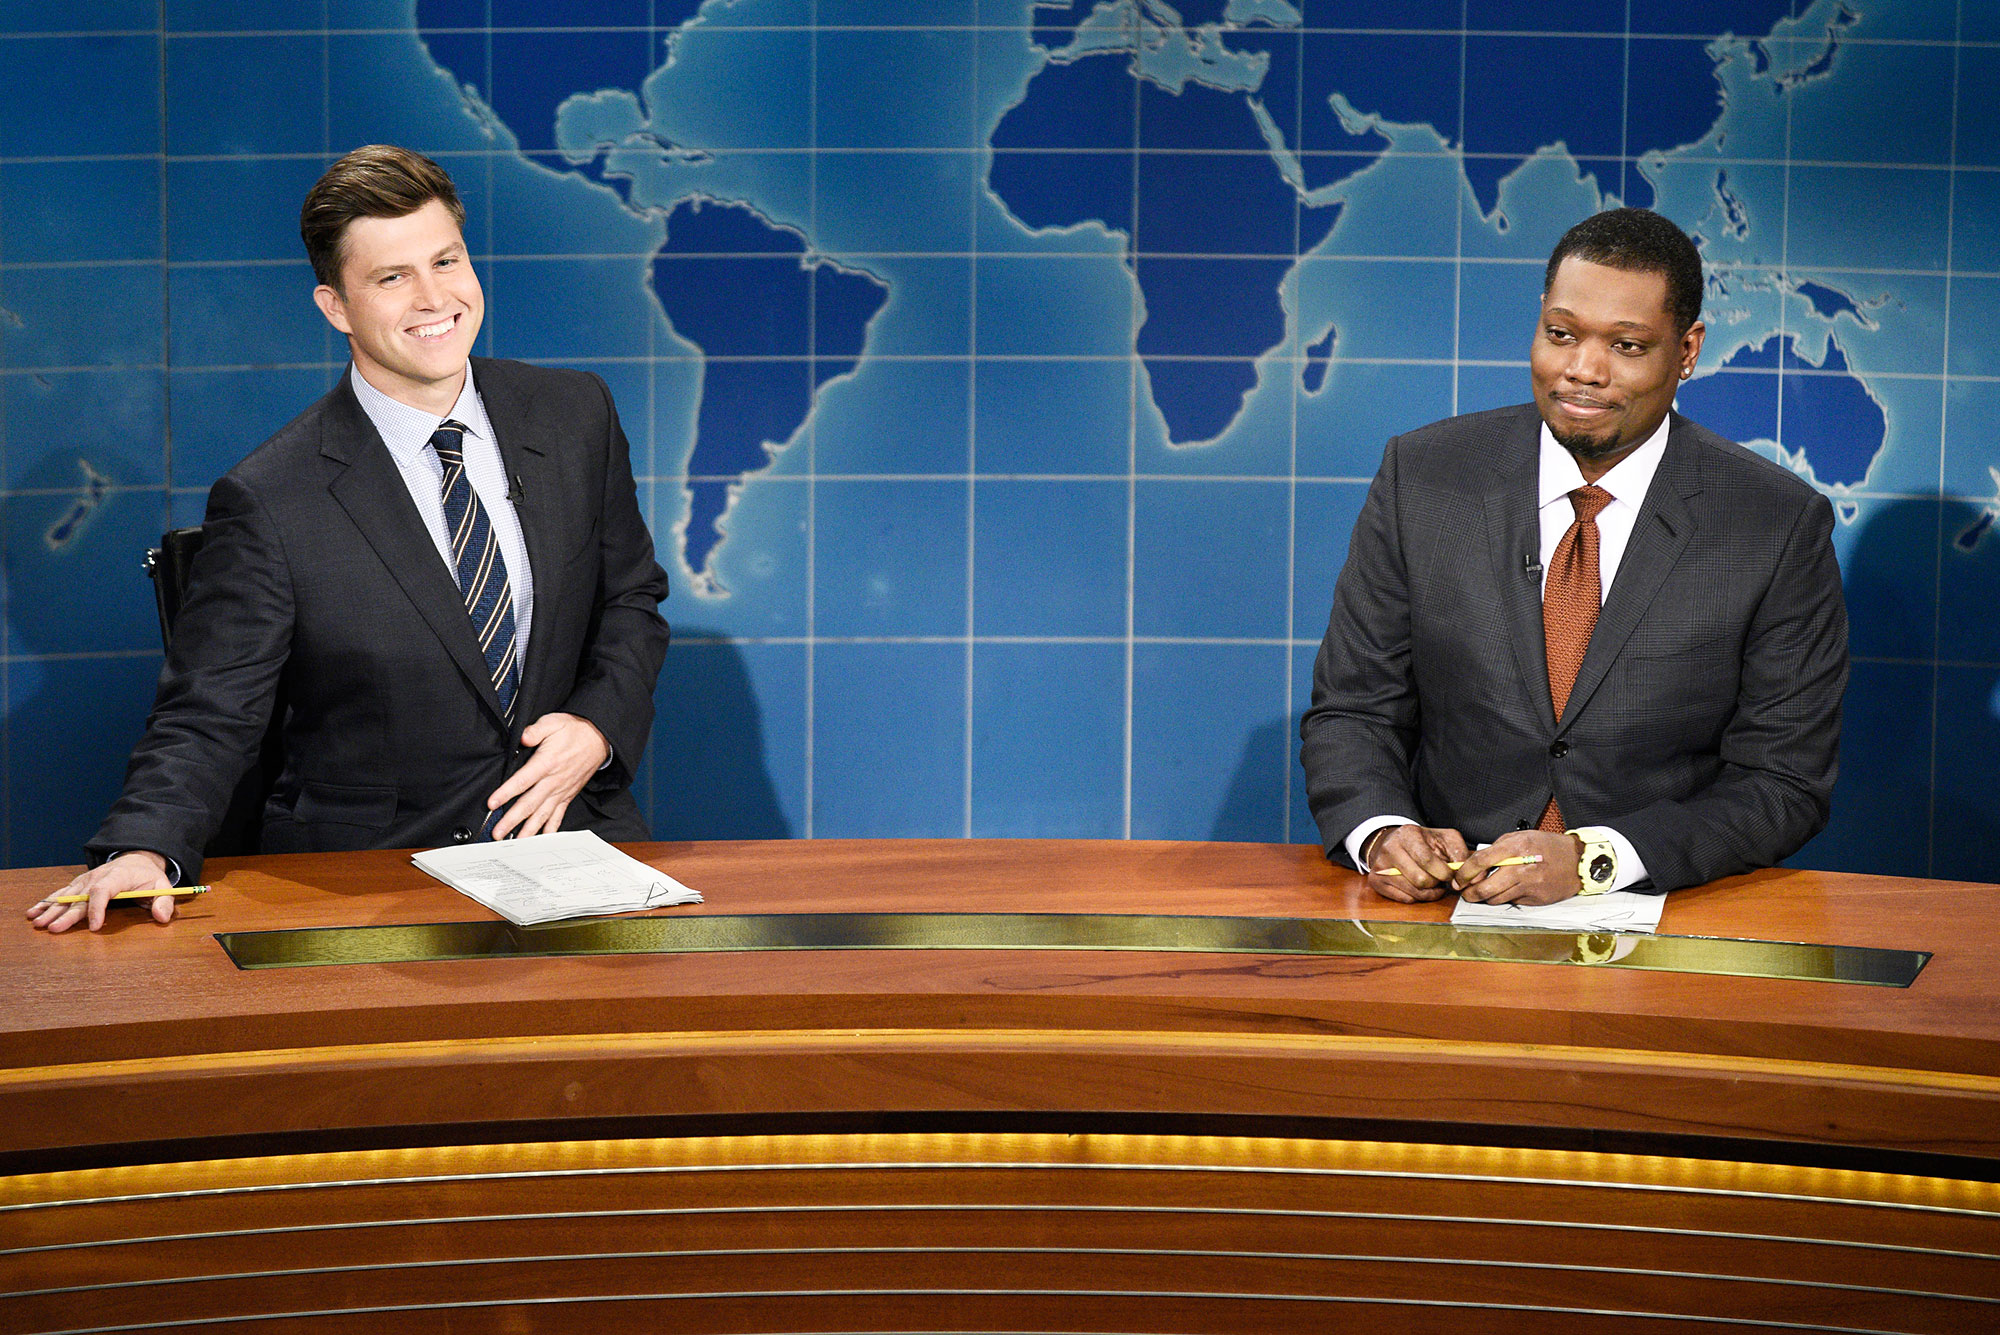 Colin Jost and Michael Che during Weekend Update on Saturday Night Live Colin Jost Returns to Saturday Night Live After Wedding to Scarlett Johansson